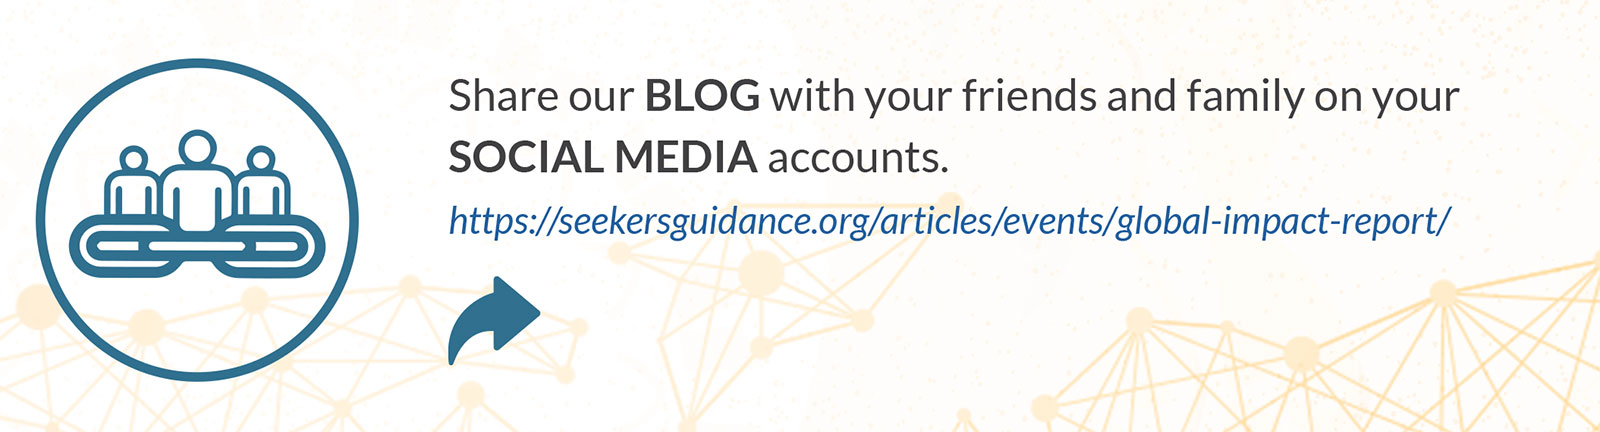 Share Our Blog with your friends